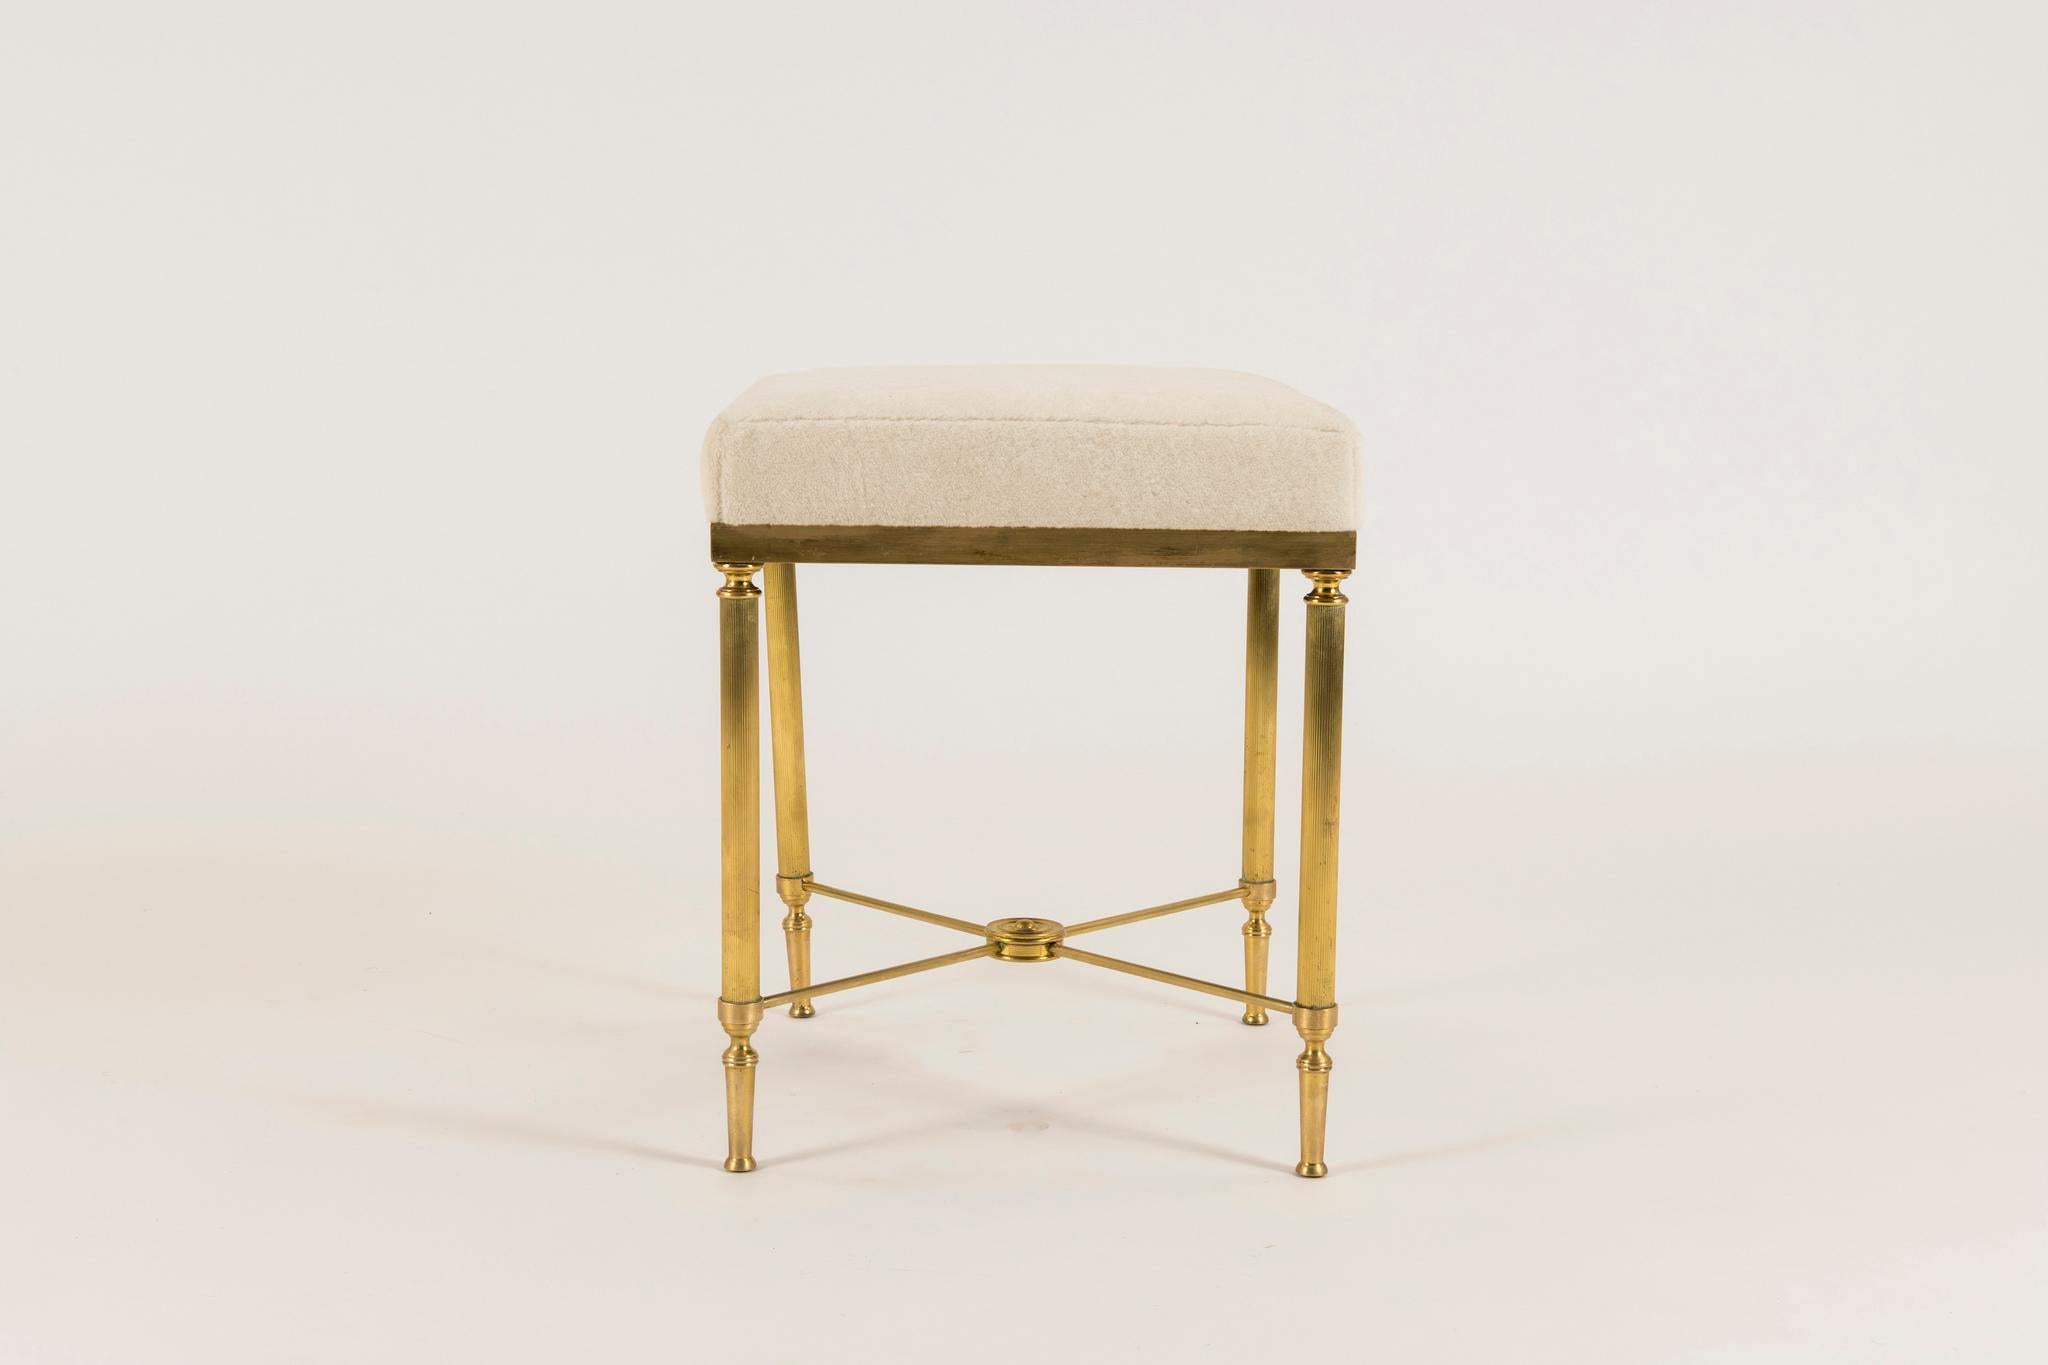 A beautifully constructed vintage neoclassical style detailed brass bench with tapered and fluted legs and radiused stretchers in the style of Maison Jansen. Seat is upholstered in a creamy Pollack Luxe Alapaca Fleece. Also available